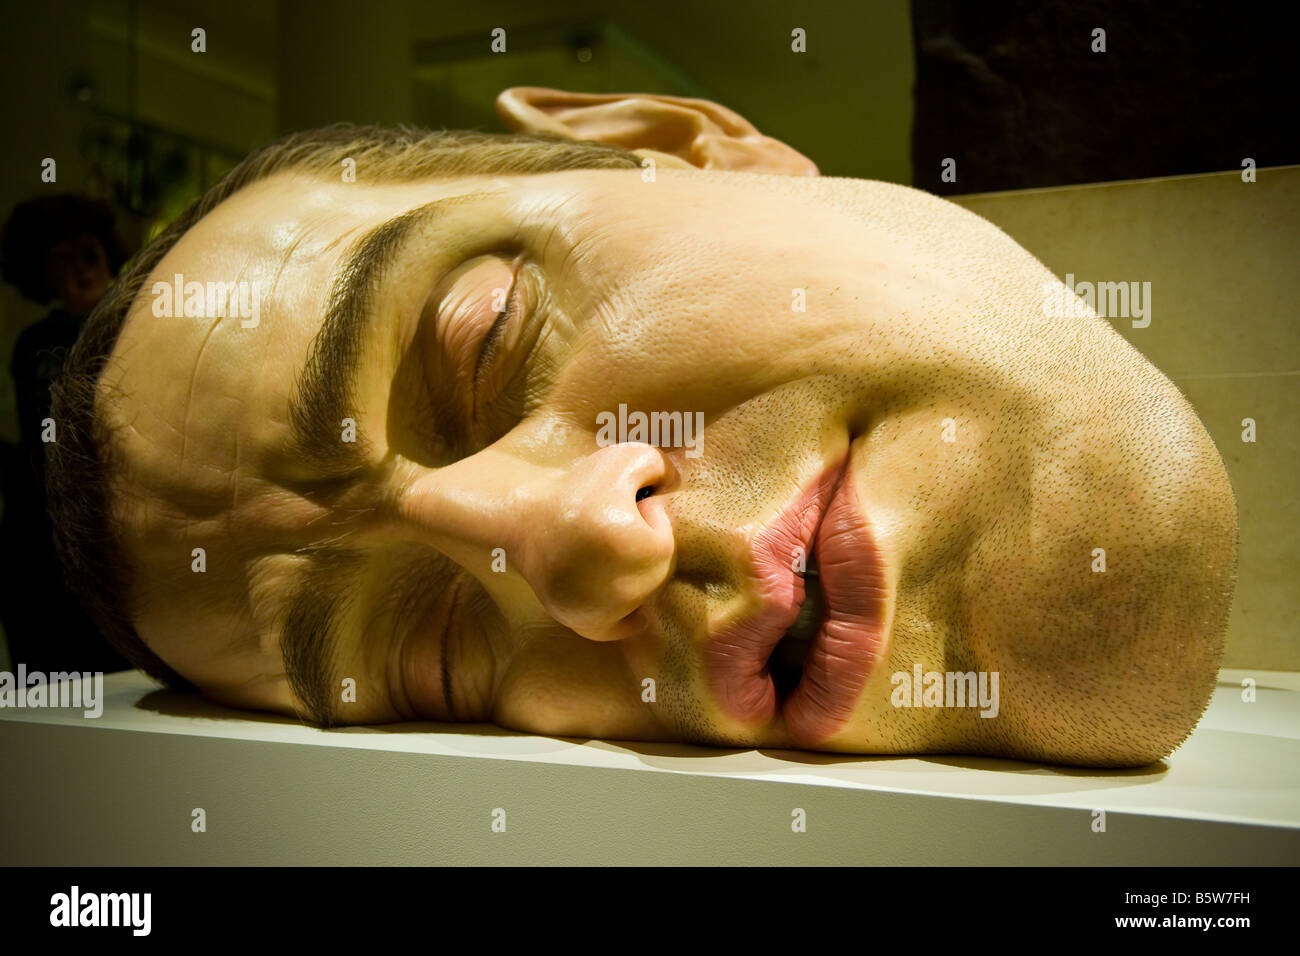 London , The British Museum , the stunning realistic modern sculpture , Mask 11 by Ron Mueck in 2001/02 made from mixed media Stock Photo